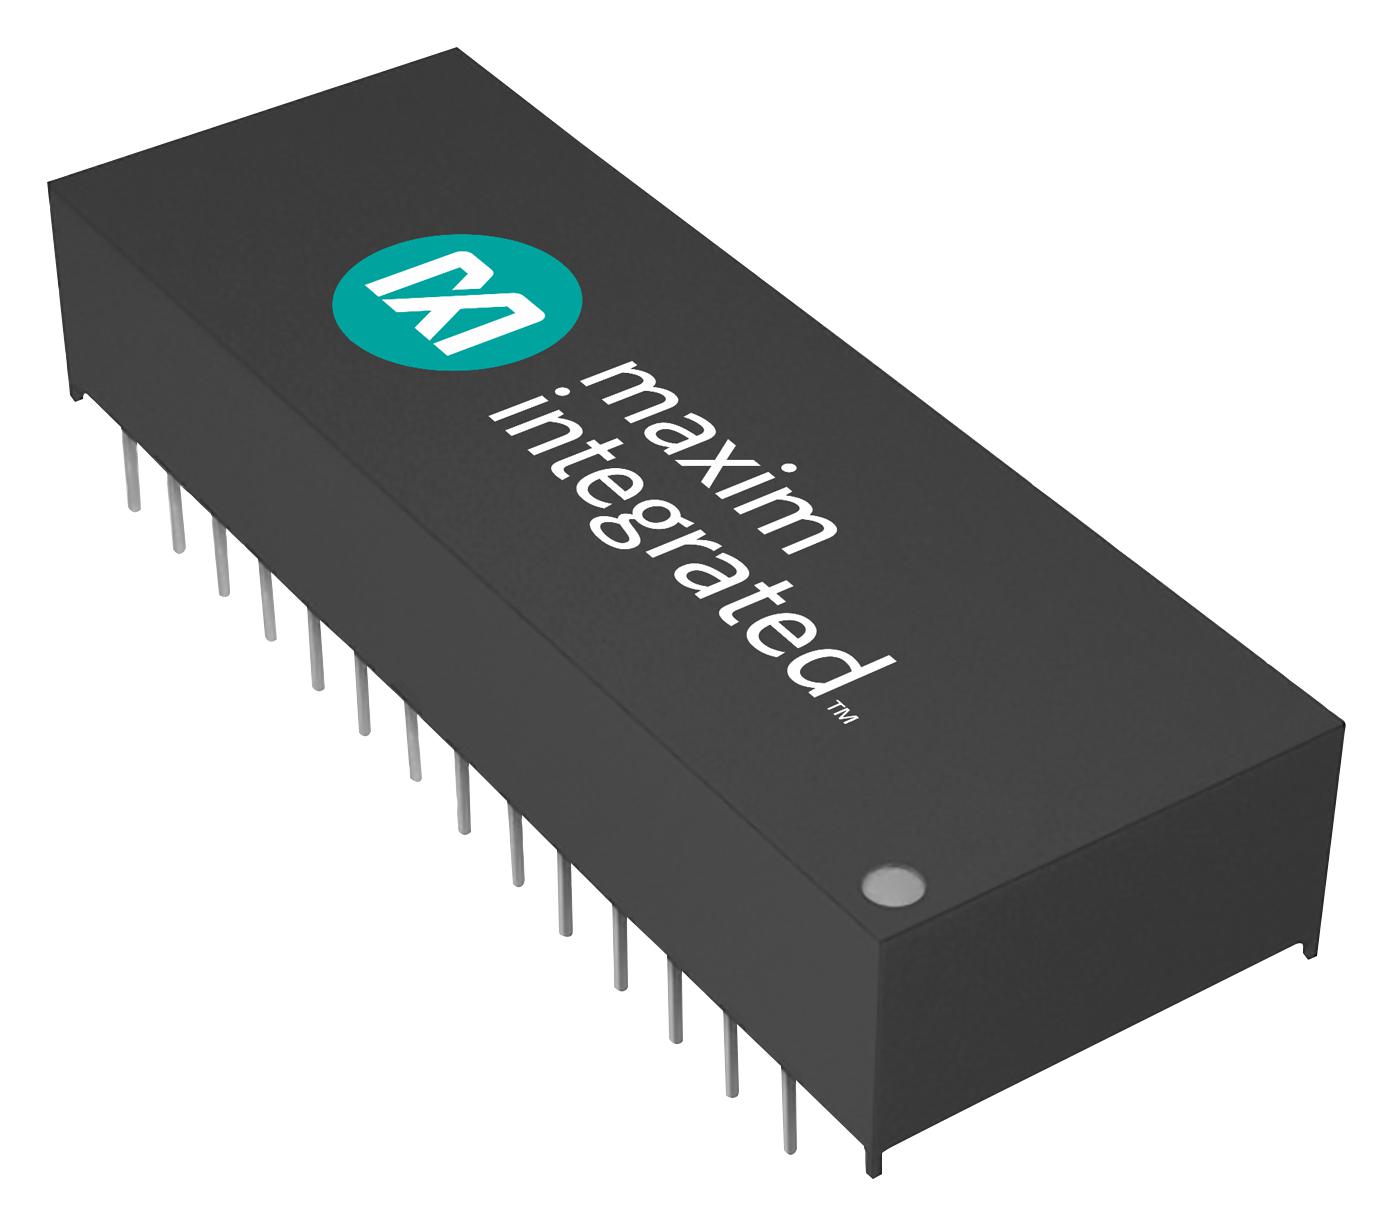 DS1245Y-120IND+ NON-VOLATILE SRAM, 1MBIT, 120NS, EDIP-32 MAXIM INTEGRATED / ANALOG DEVICES